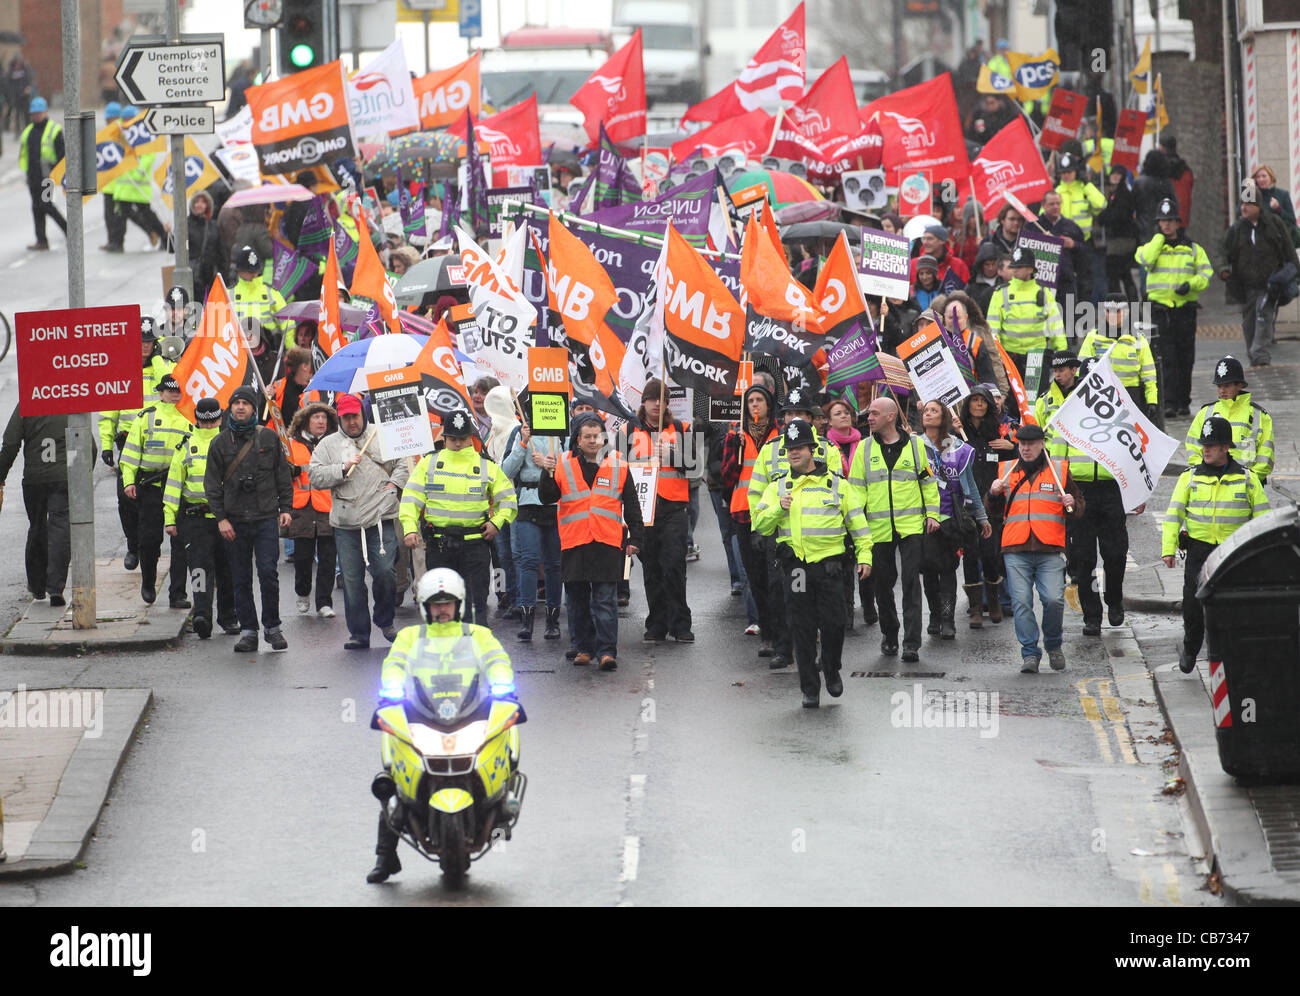 Public sector strikers march through the streets of Brighton during a National strike over pensions. Picture by James Boardman. Stock Photo